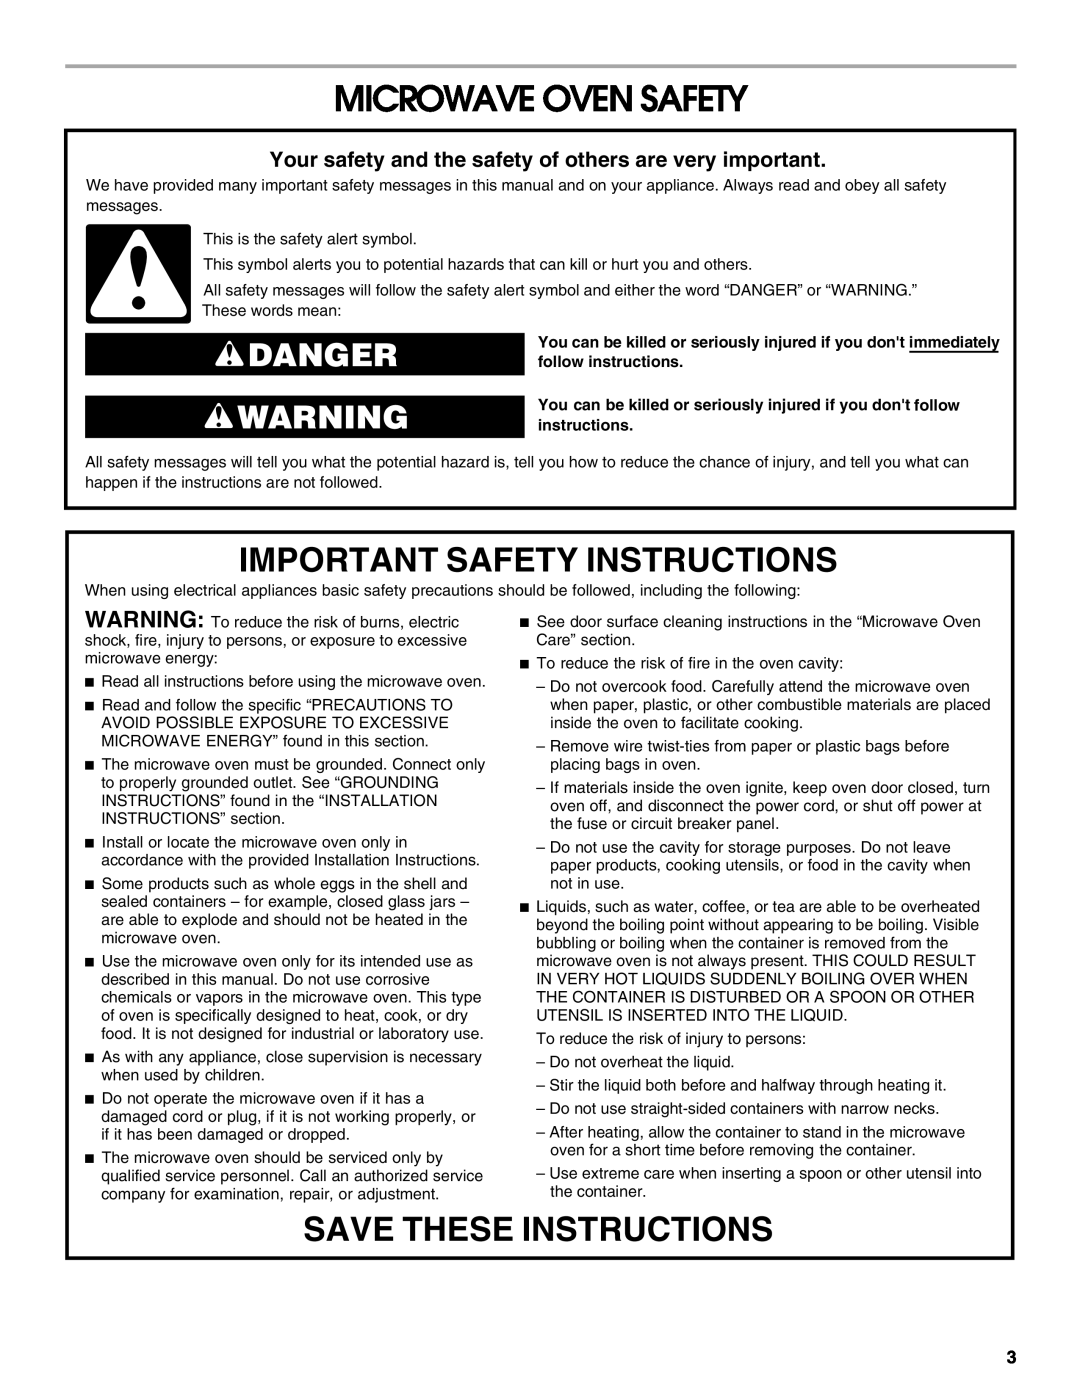 Jenn-Air JMC1116 manual Microwave Oven Safety, Important Safety Instructions, Save These Instructions, Danger 